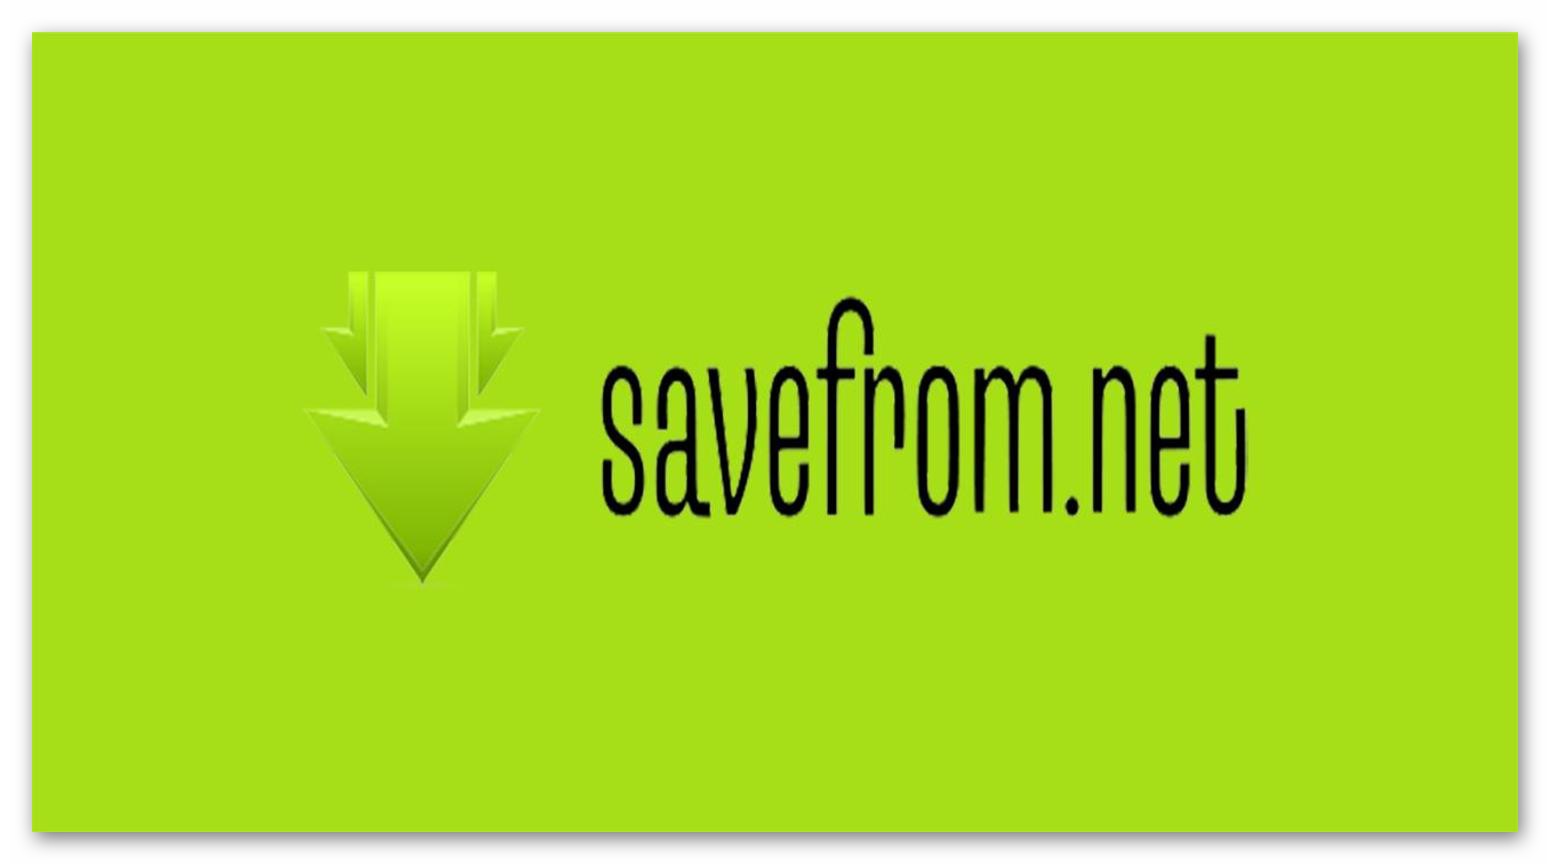 Com extensions details savefromnet helper. Savefrom. Safe from. Savefrom.net картинки. Savefrom иконка.